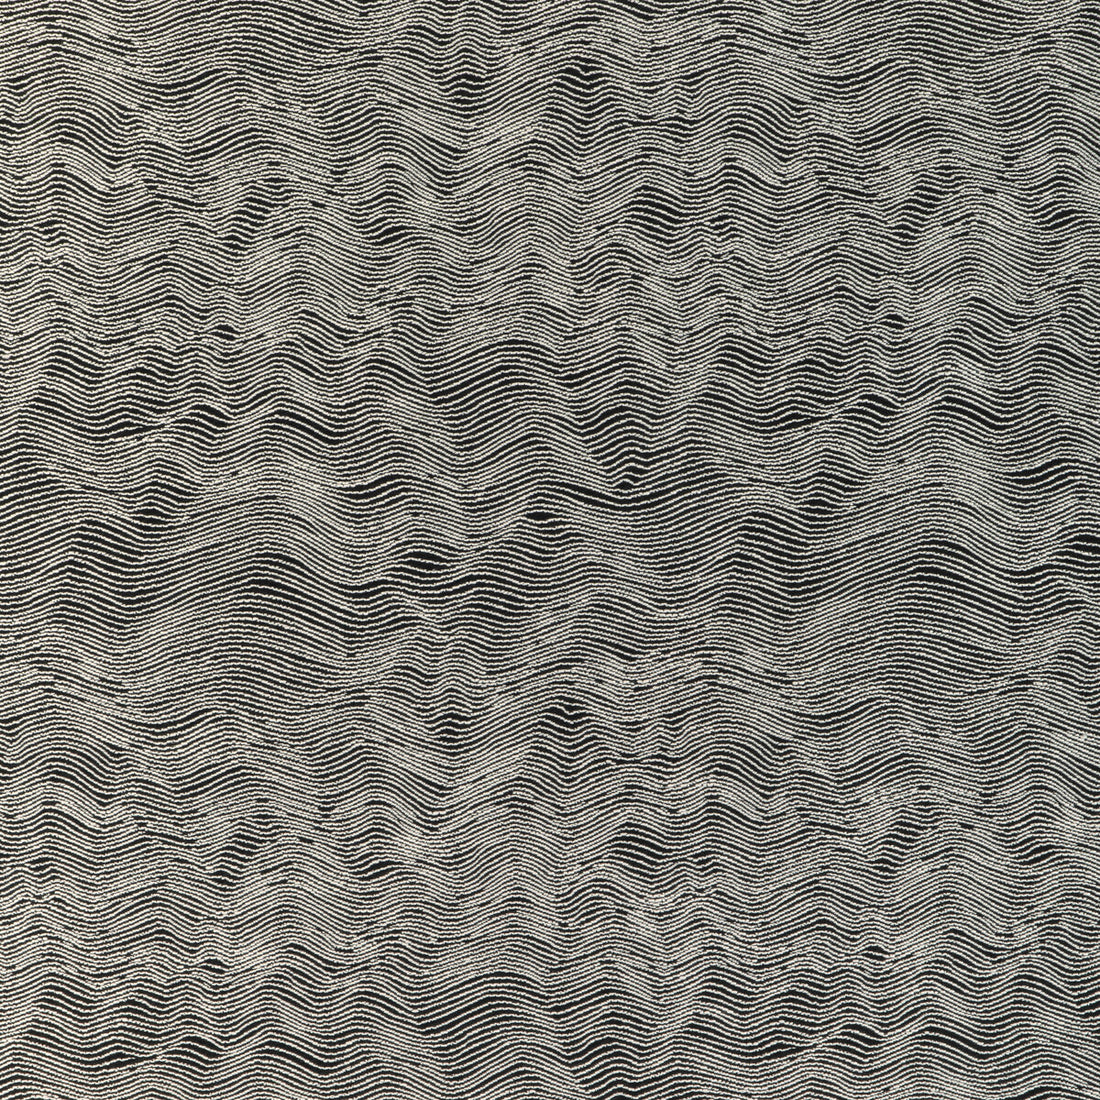 Watery Motion fabric in pepper color - pattern 37056.81.0 - by Kravet Design in the Thom Filicia Latitude collection